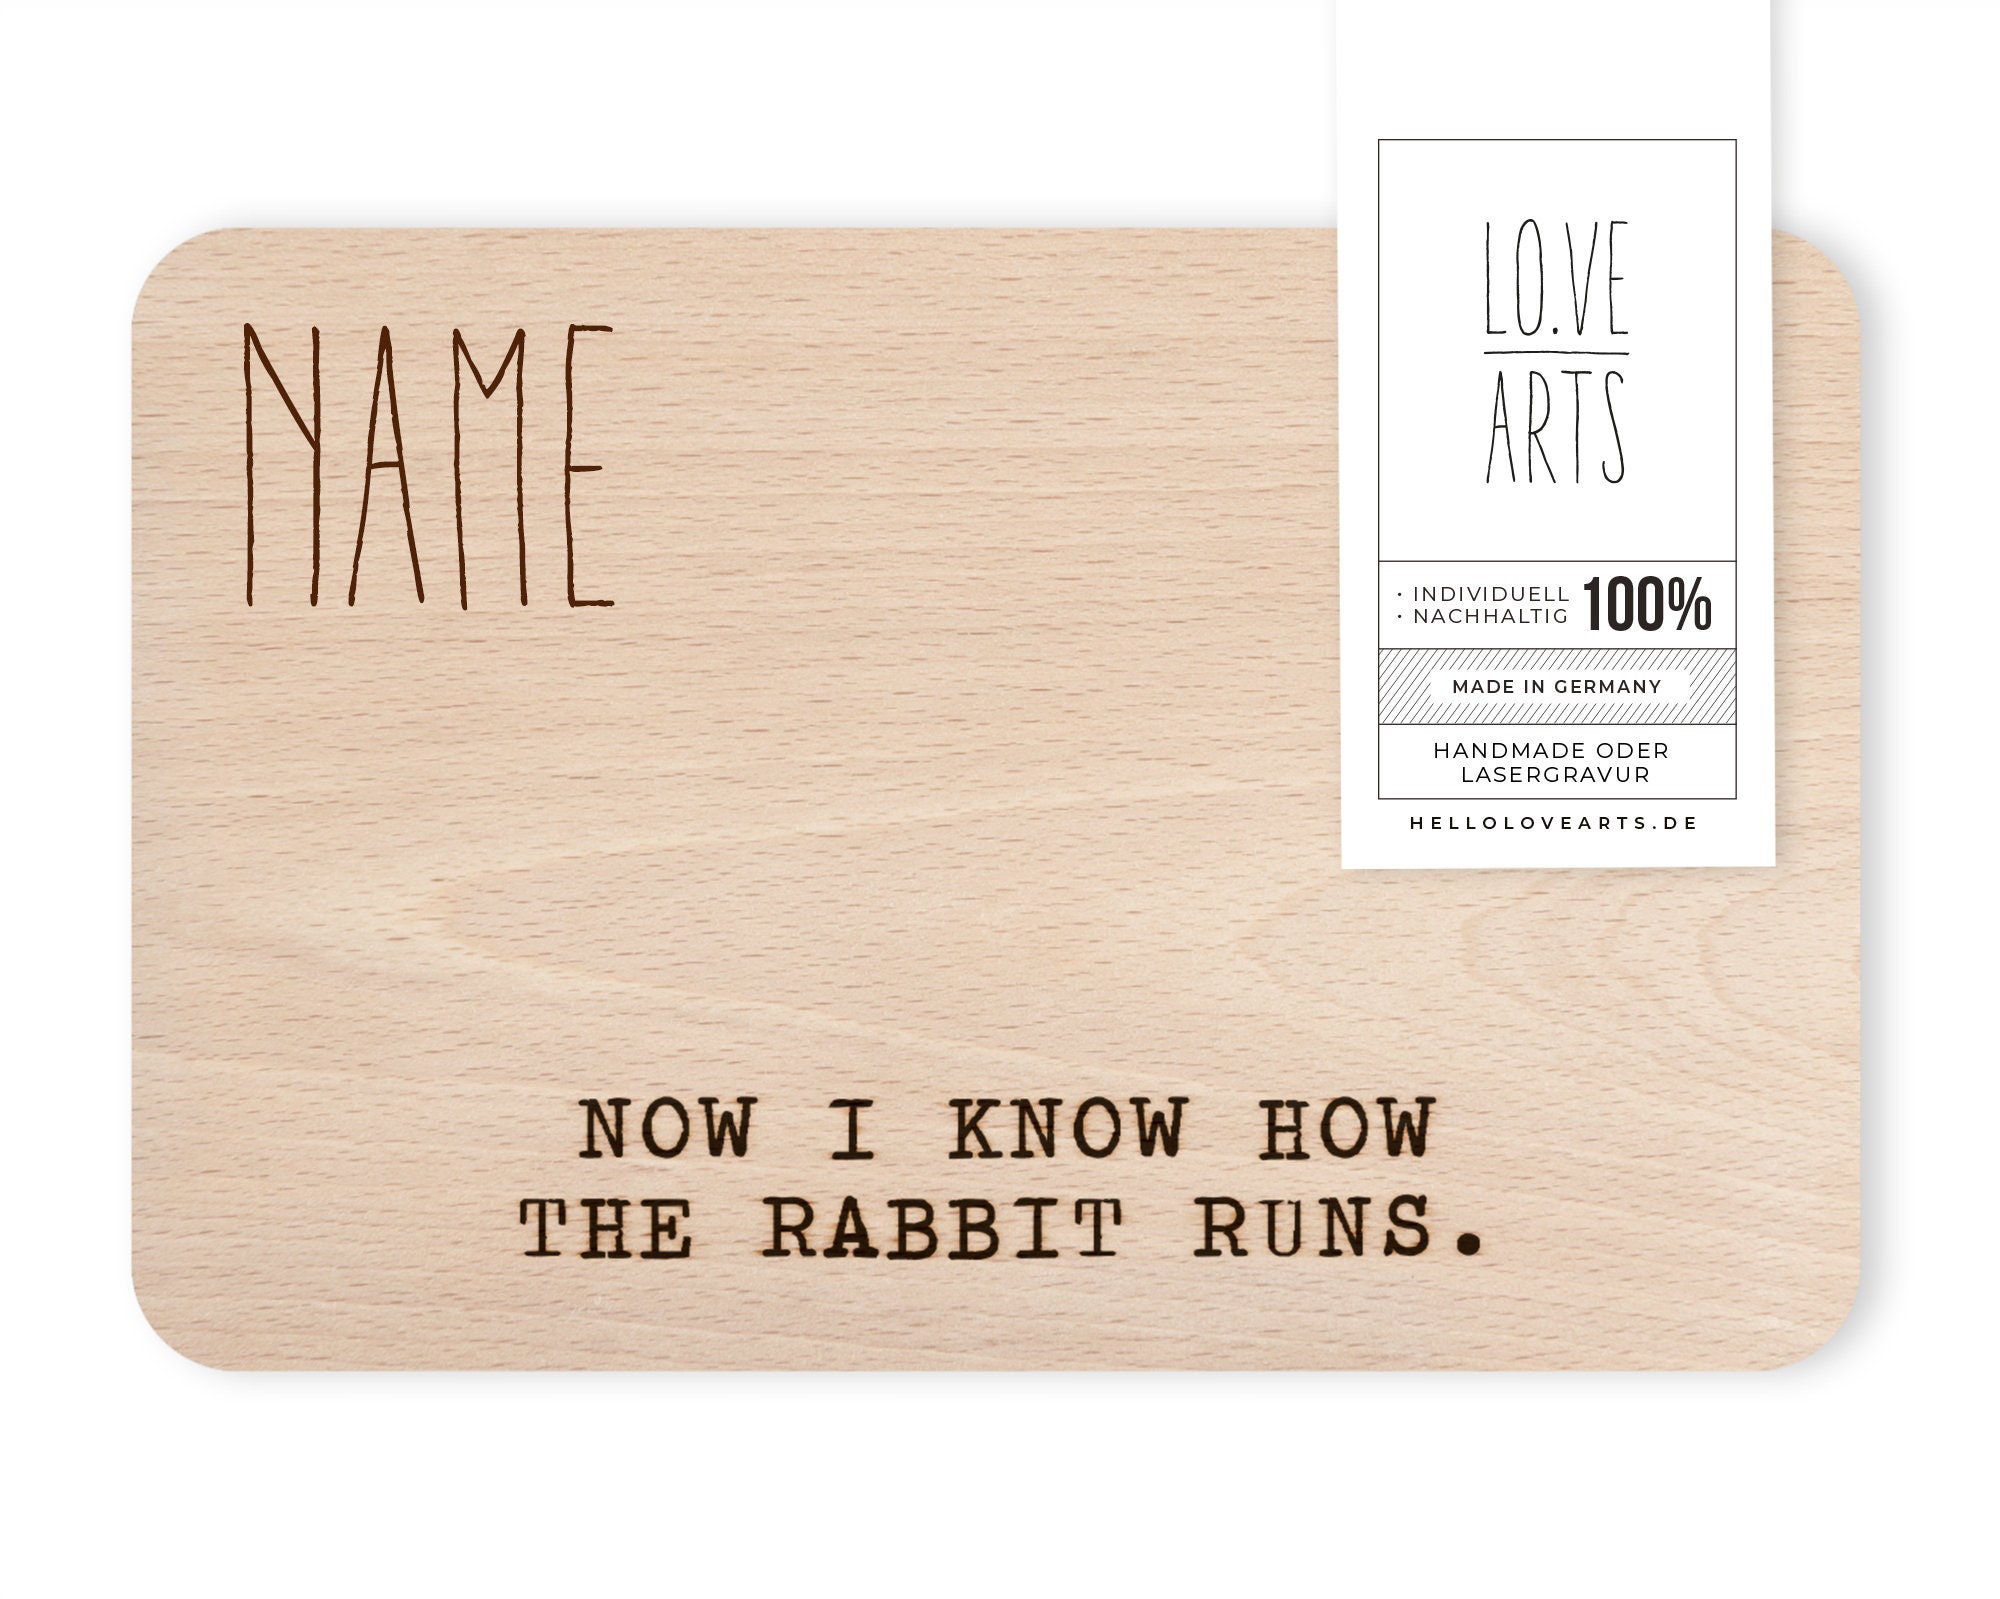 Runs Etsy - by Rabbit now How Board the I Wooden Know